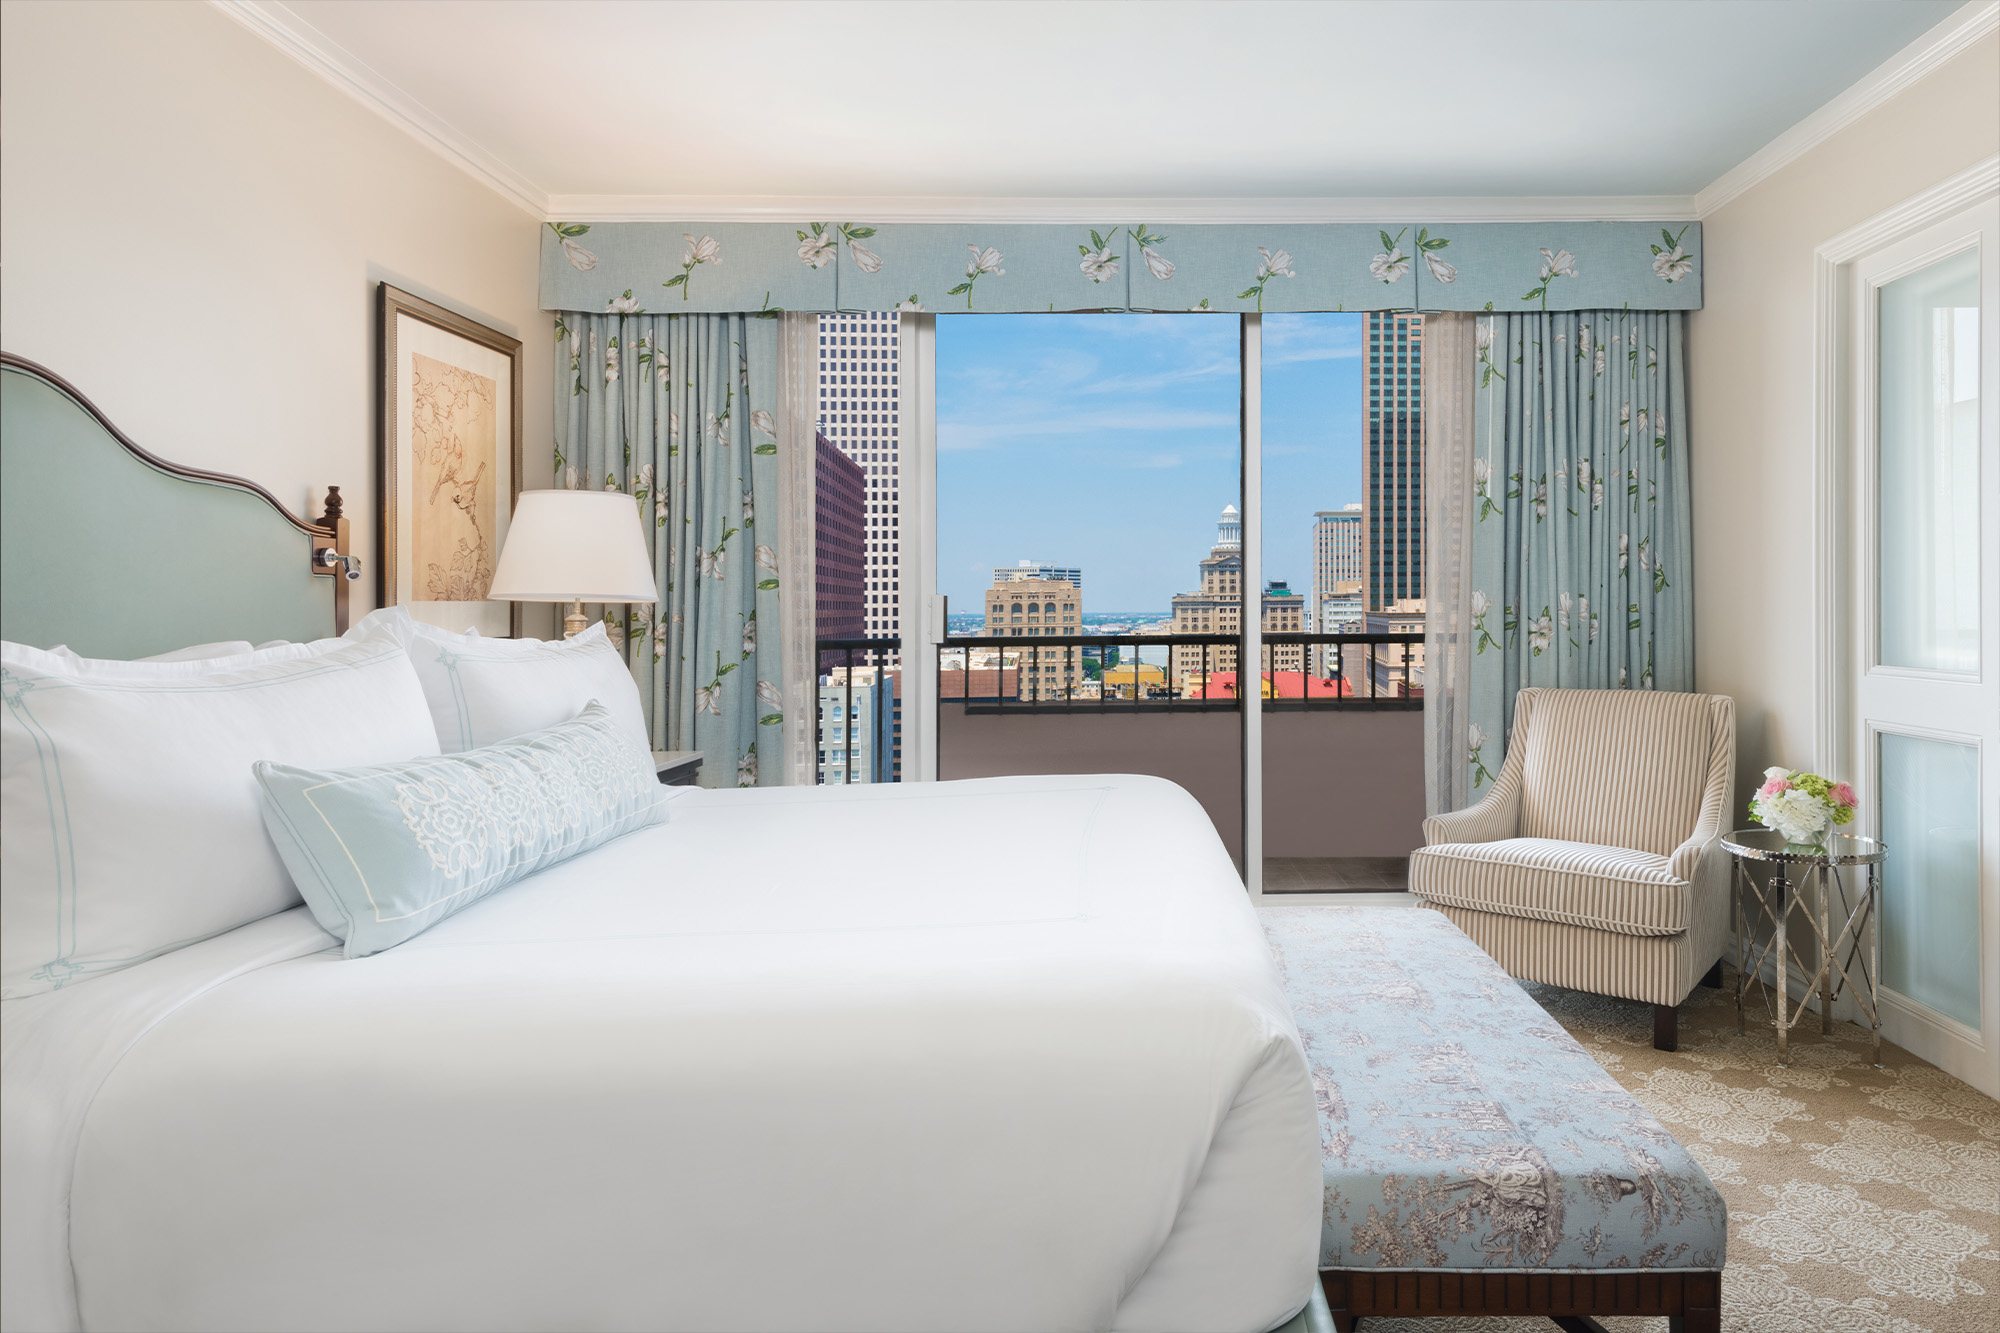 Premium Suite - The Windsor Court Hotel in New Orleans